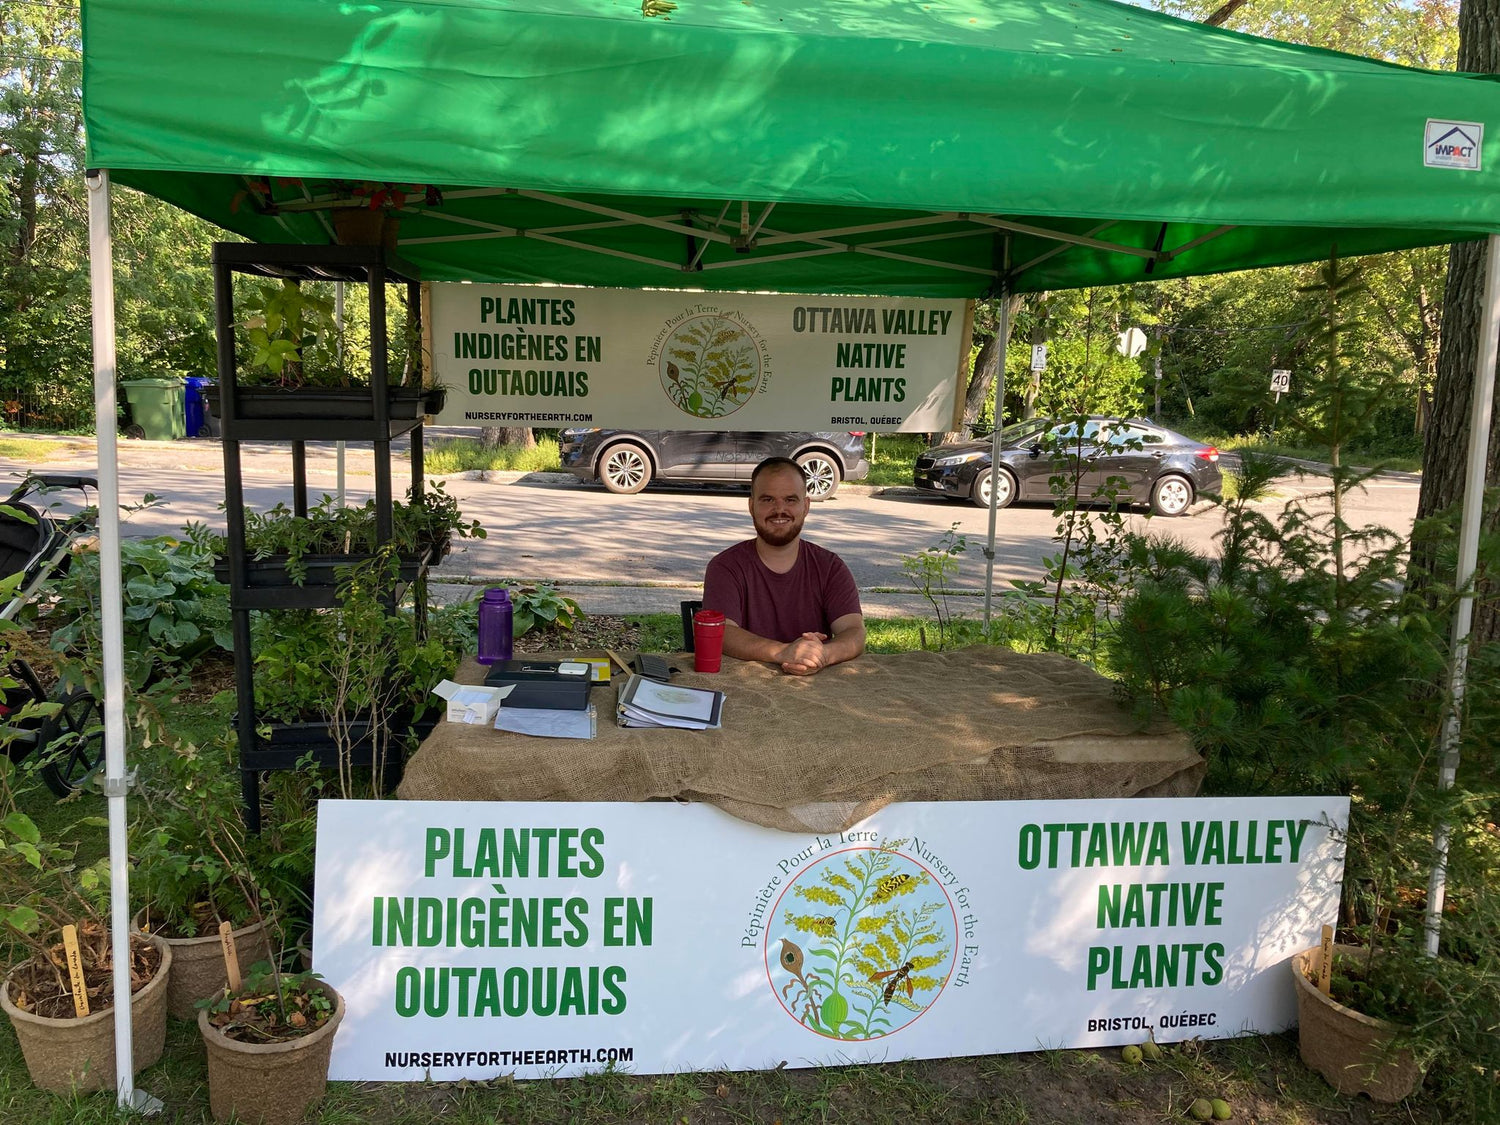 Nursery for the Earth at the Old Aylmer Market